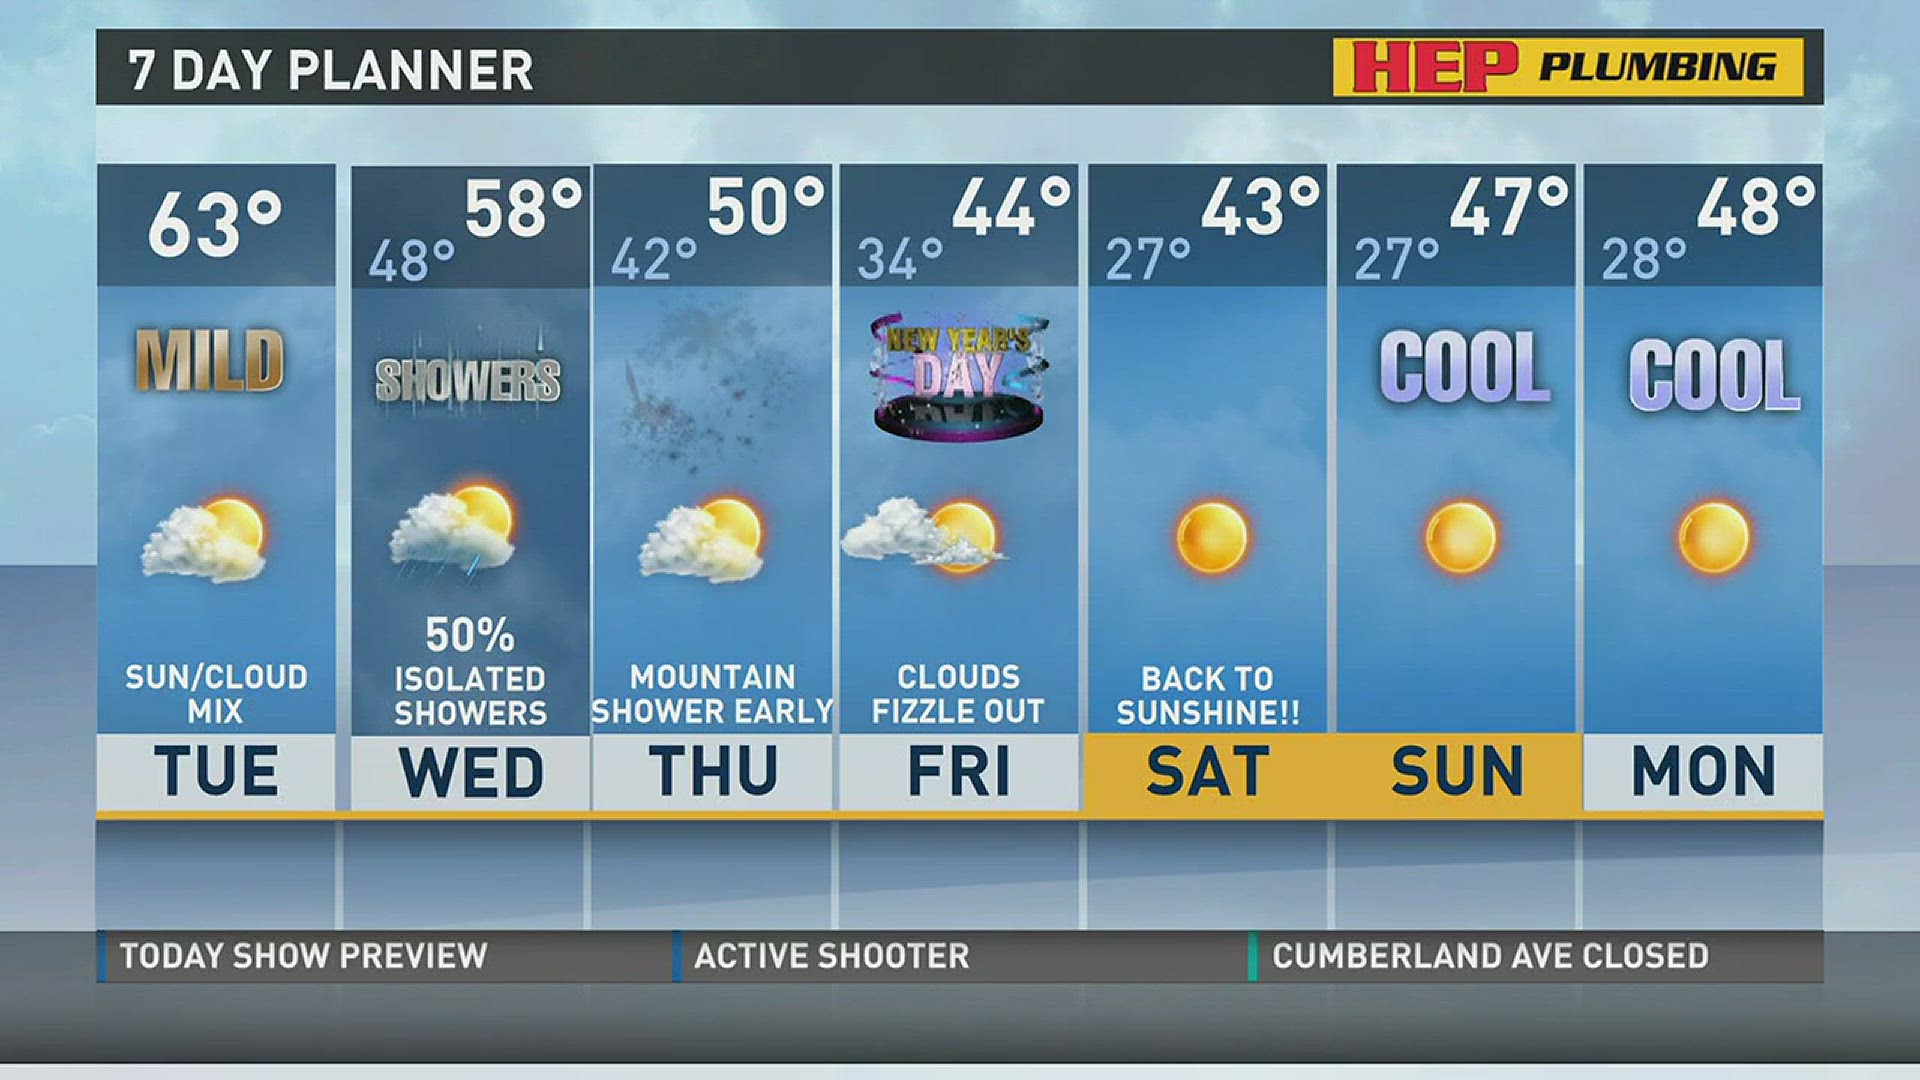 Rain clears Tuesday, temperatures start to get cool as the week progresses